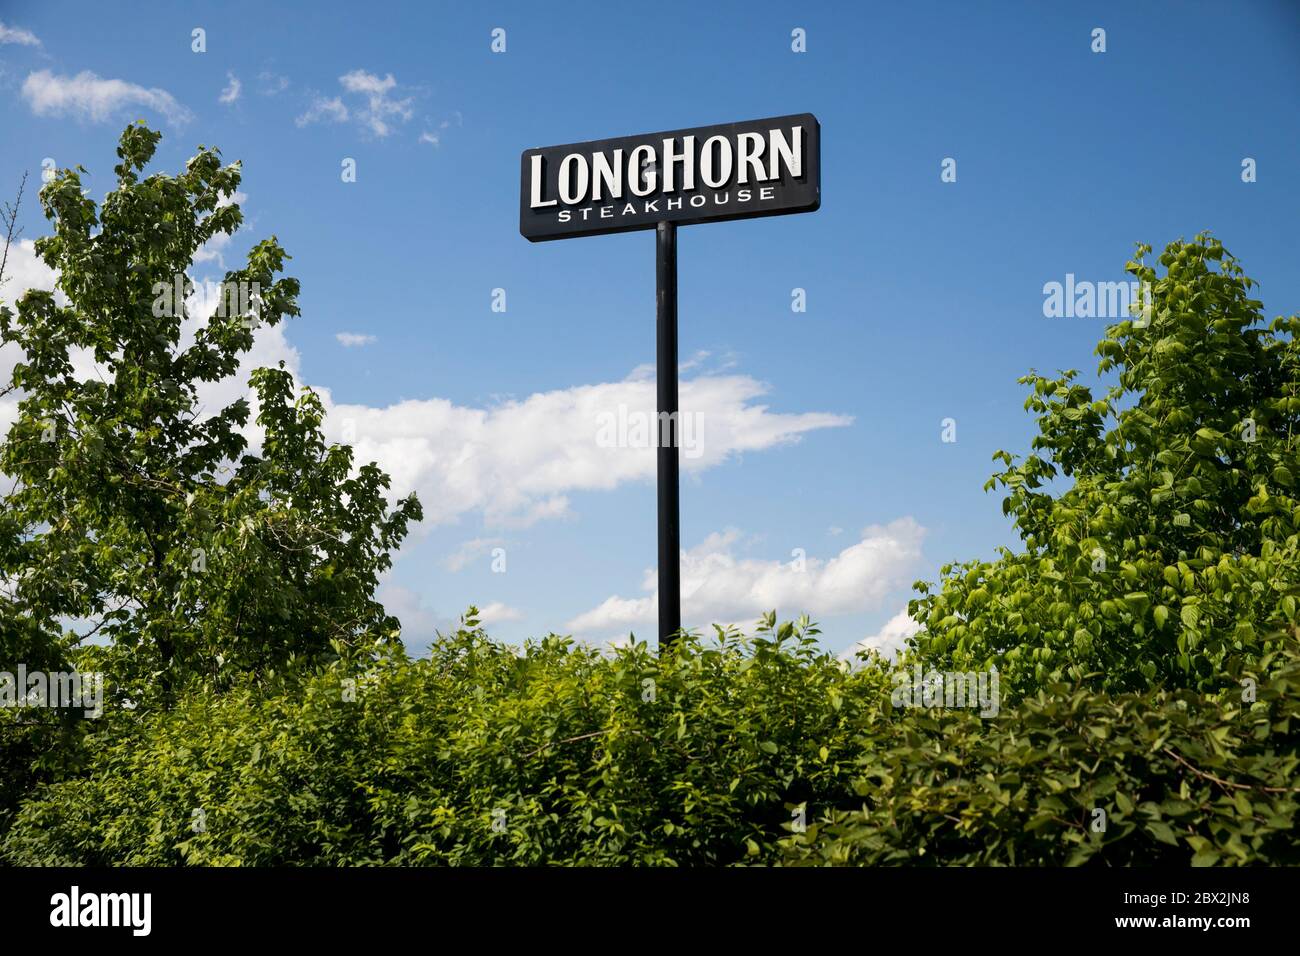 a logo sign outside of a longhorn steakhouse restaurant location in morgantown west virginia on may 29 2020 2BX2JN8